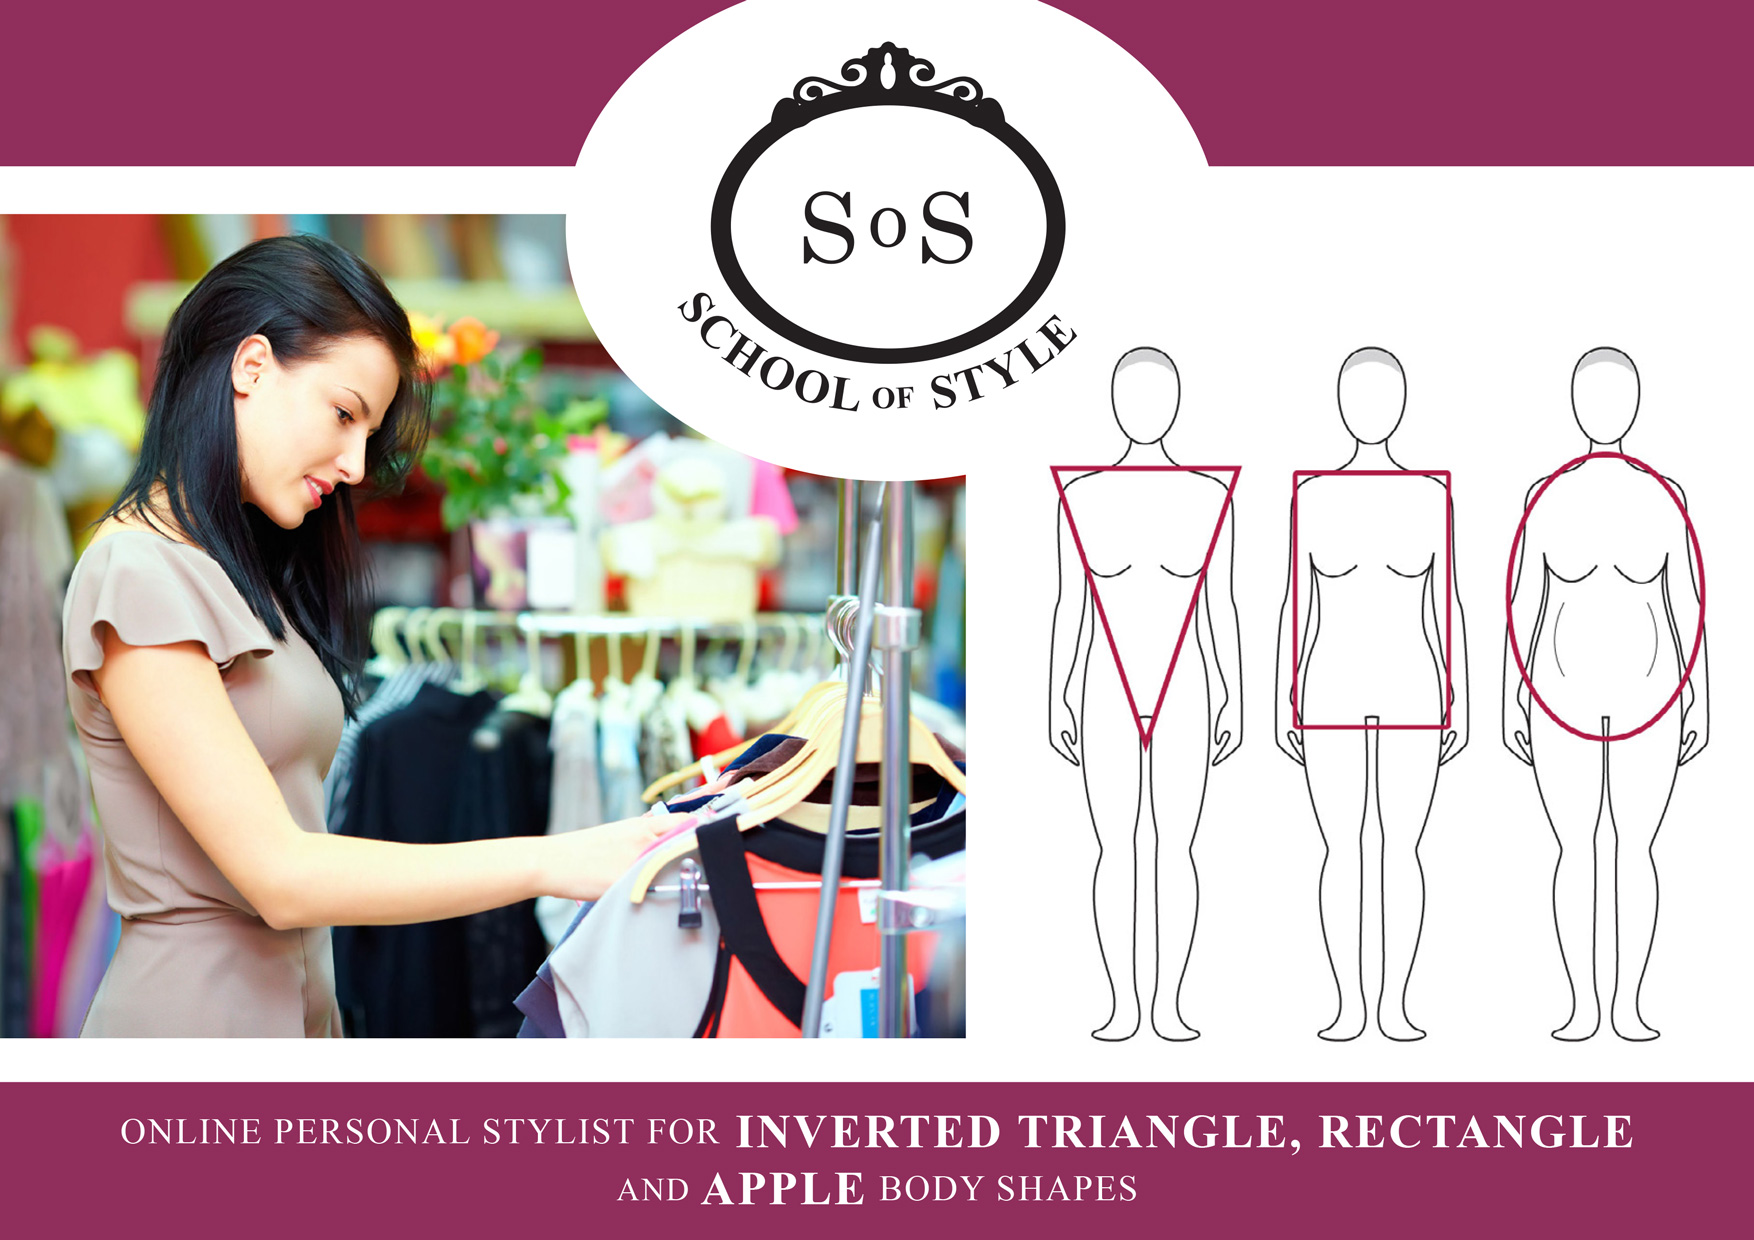 How to dress for Inverted Triangle, Rectangle and Apple Body Shapes. -  School of Style